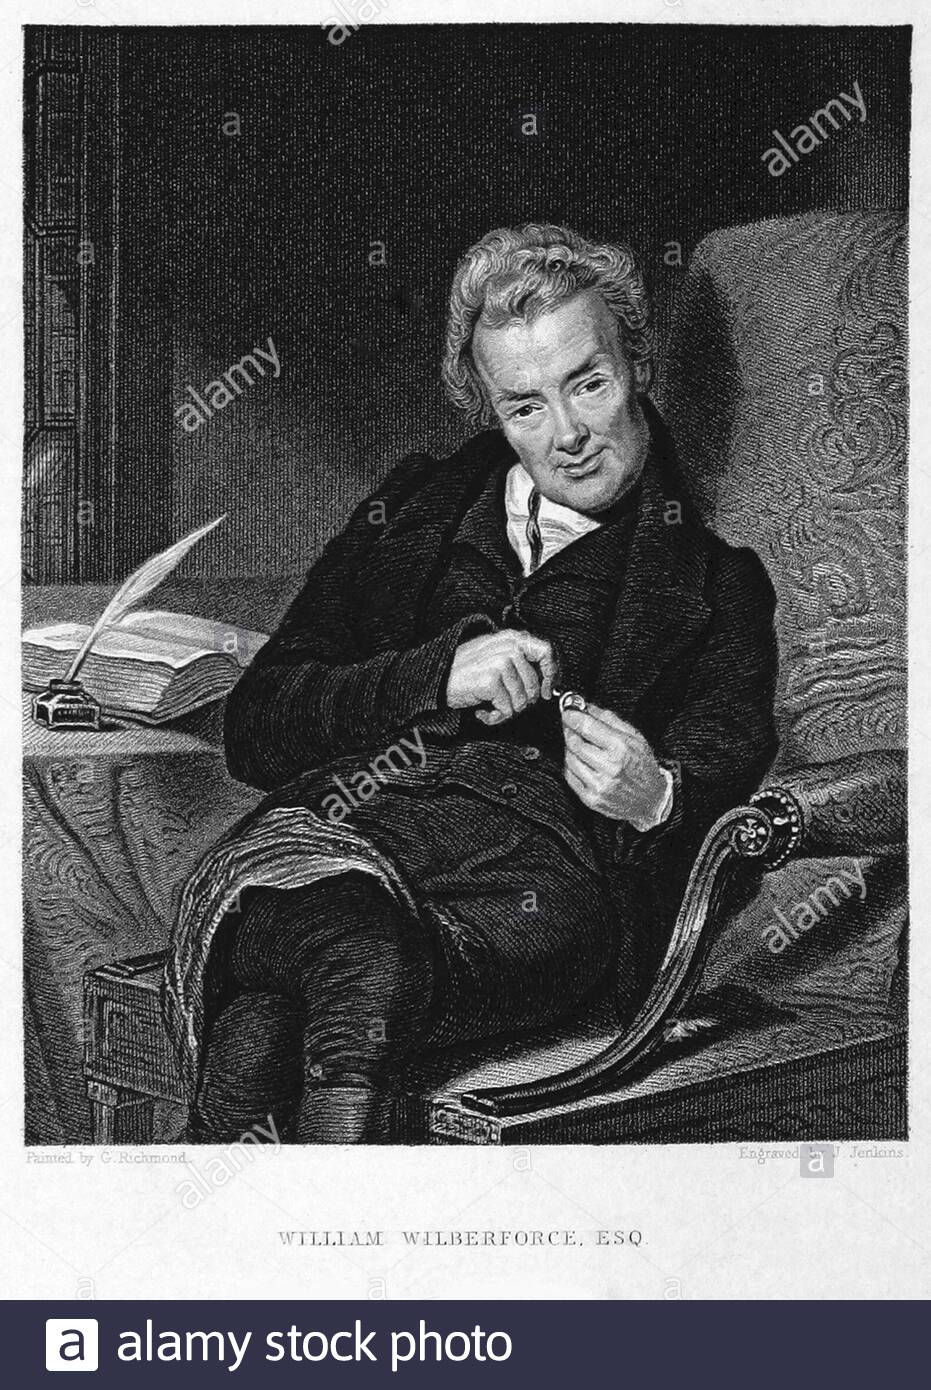 William Wilberforce, 1759 – 1833, English politician and a leader of the movement to eradicate the slave trade, vintage illustration from 1849 Stock Photo